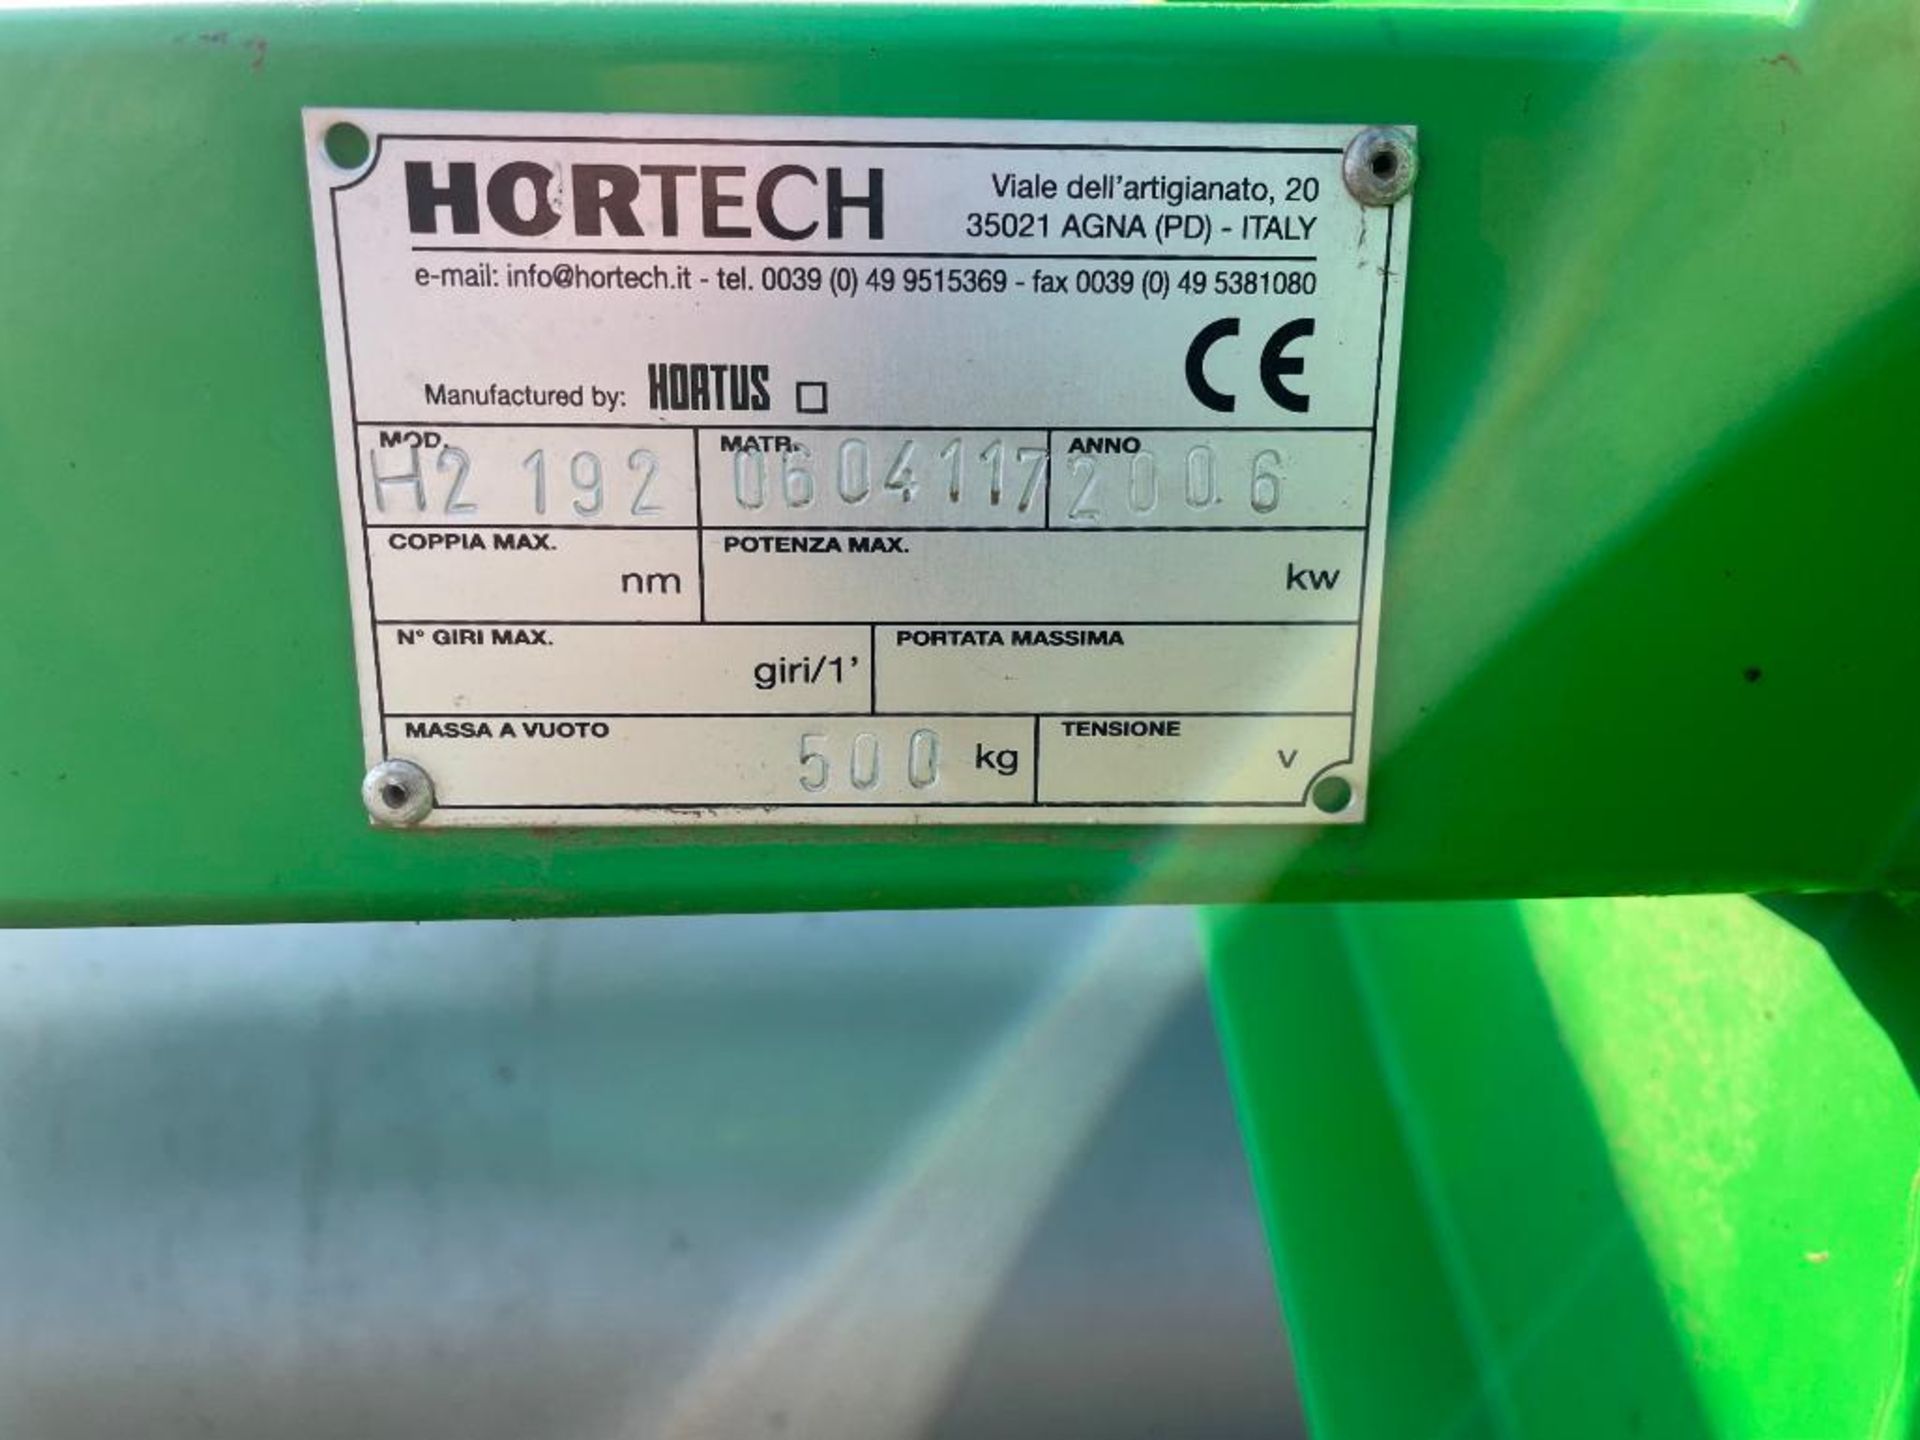 2006 Hortech Hortus Due H2 192 manual 3 row planter for large seeds, modules & nursery stock with po - Image 2 of 11